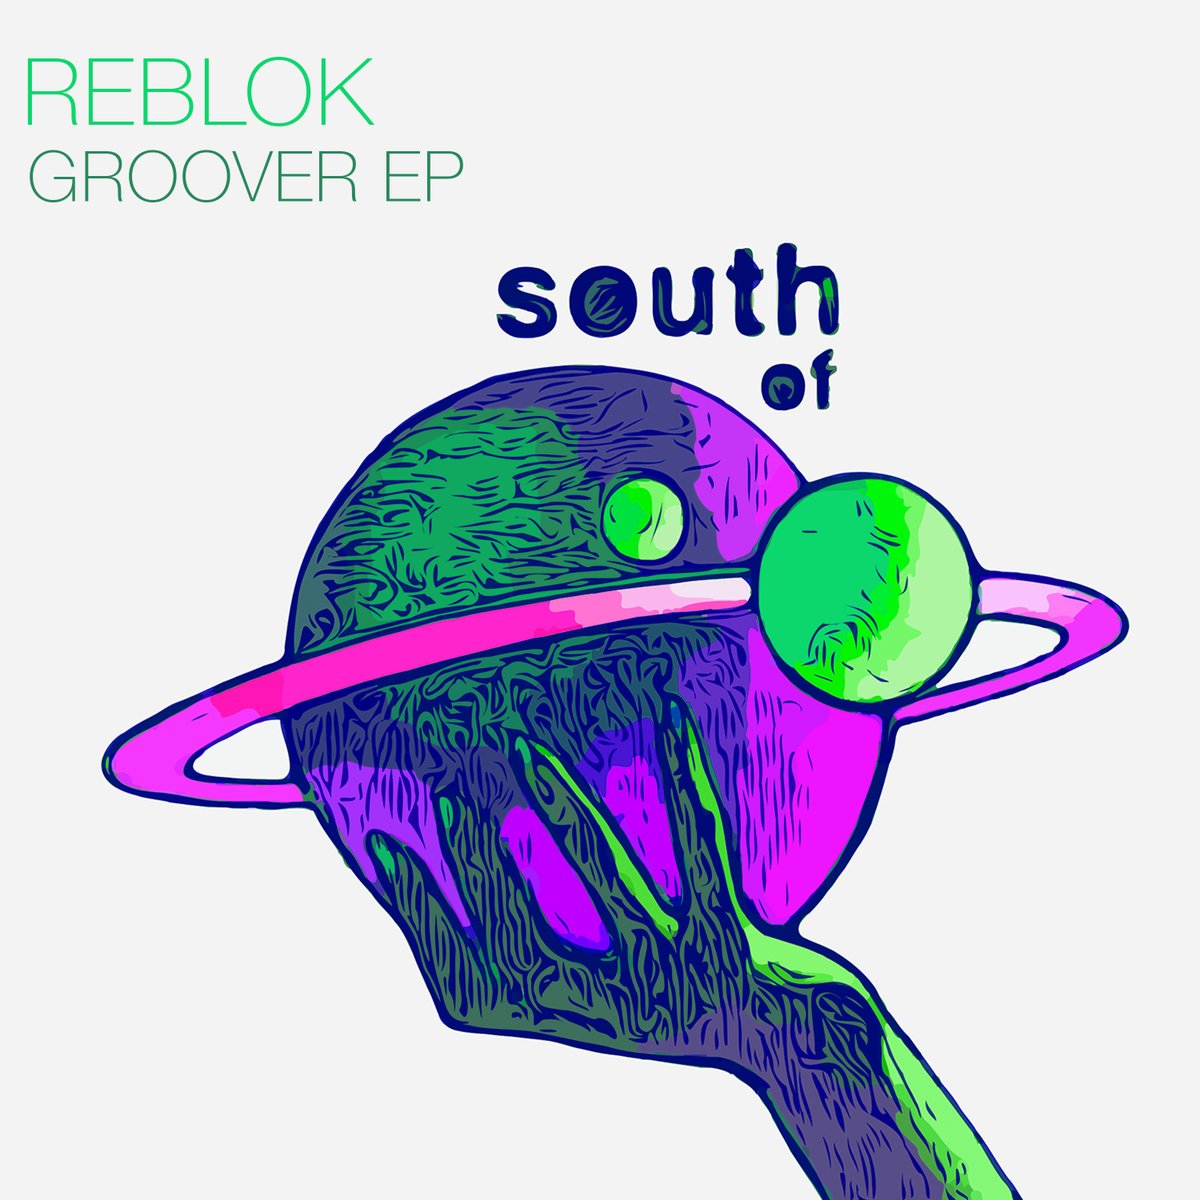 Are you a groover? Reblok is
Groover EP - out this Friday
orcd.co/SOS076